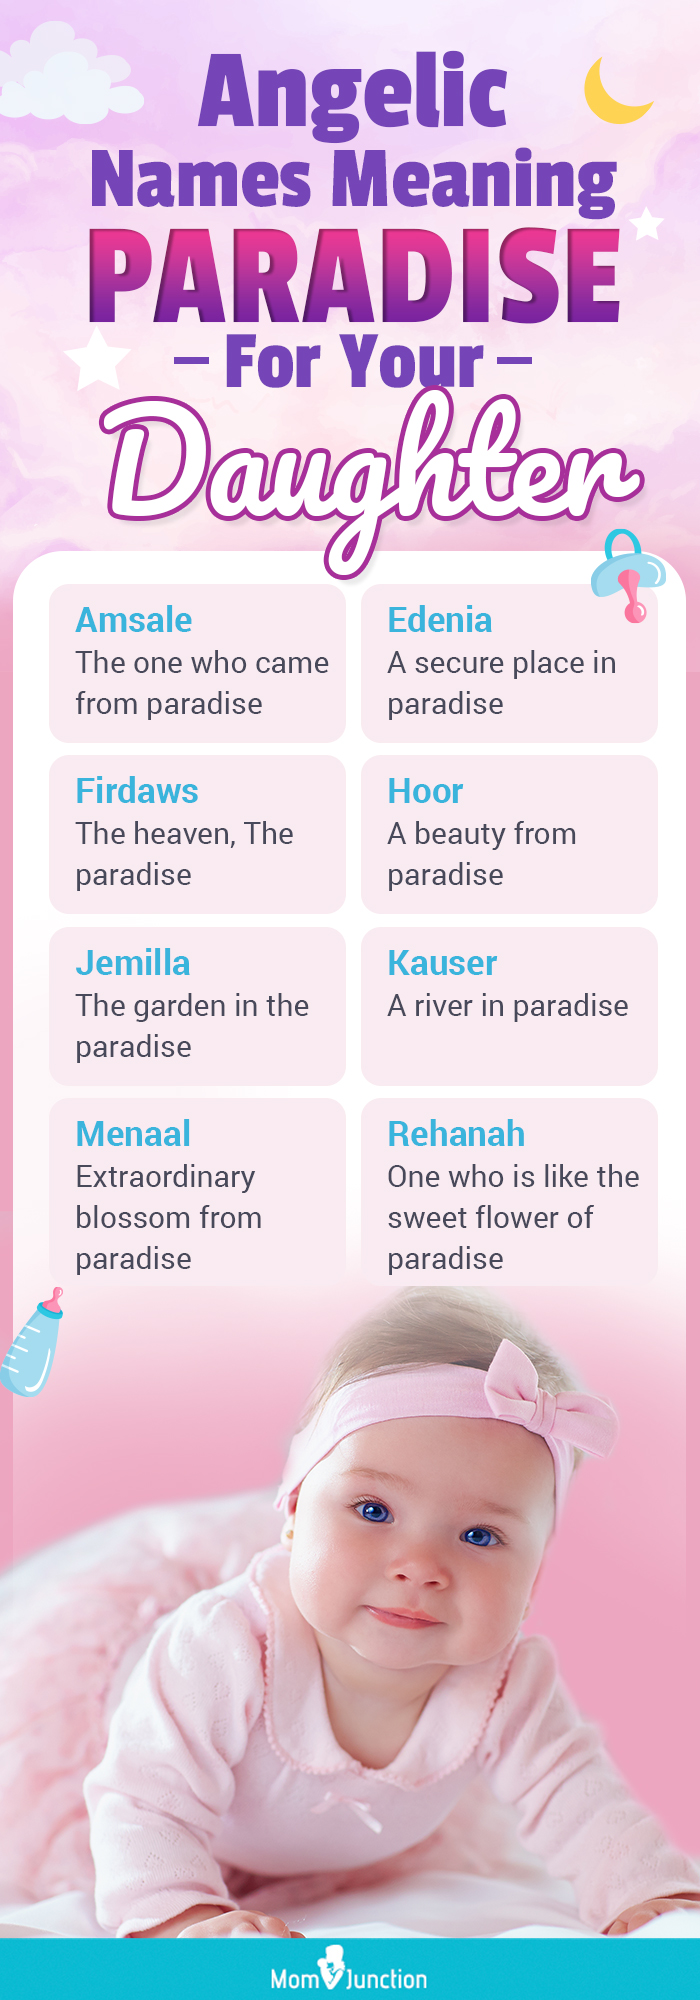 celestial names meaning paradise for your daughter (infographic)